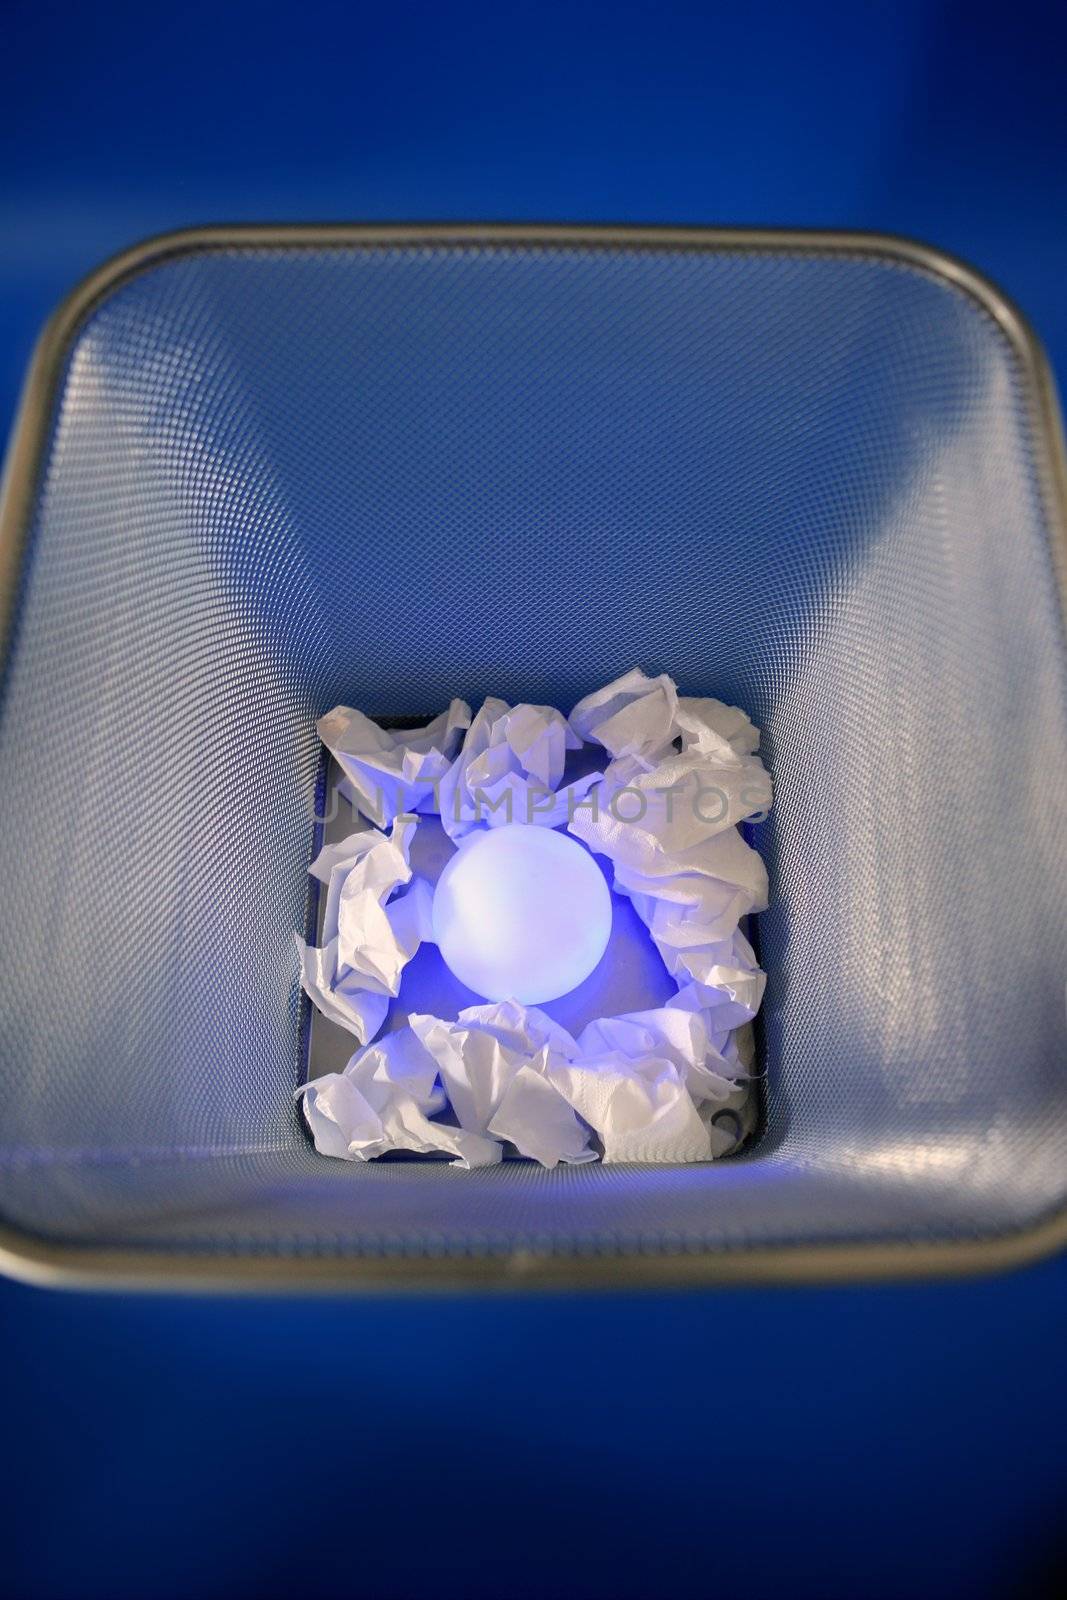 Glowing light sphere on the paper office trash, business metaphor